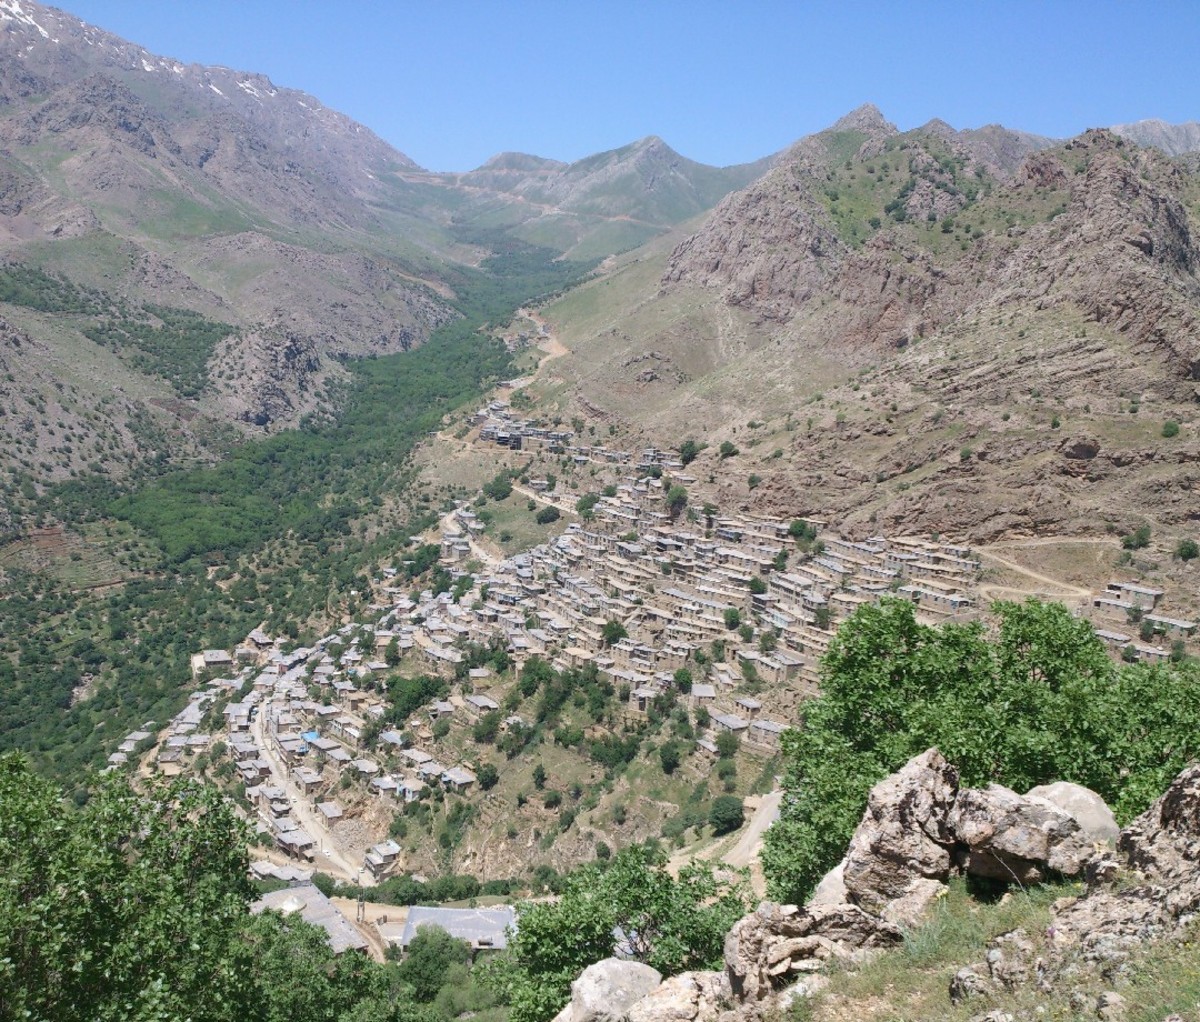 A Hawrami vertical settlement built in the mountains of Iran.